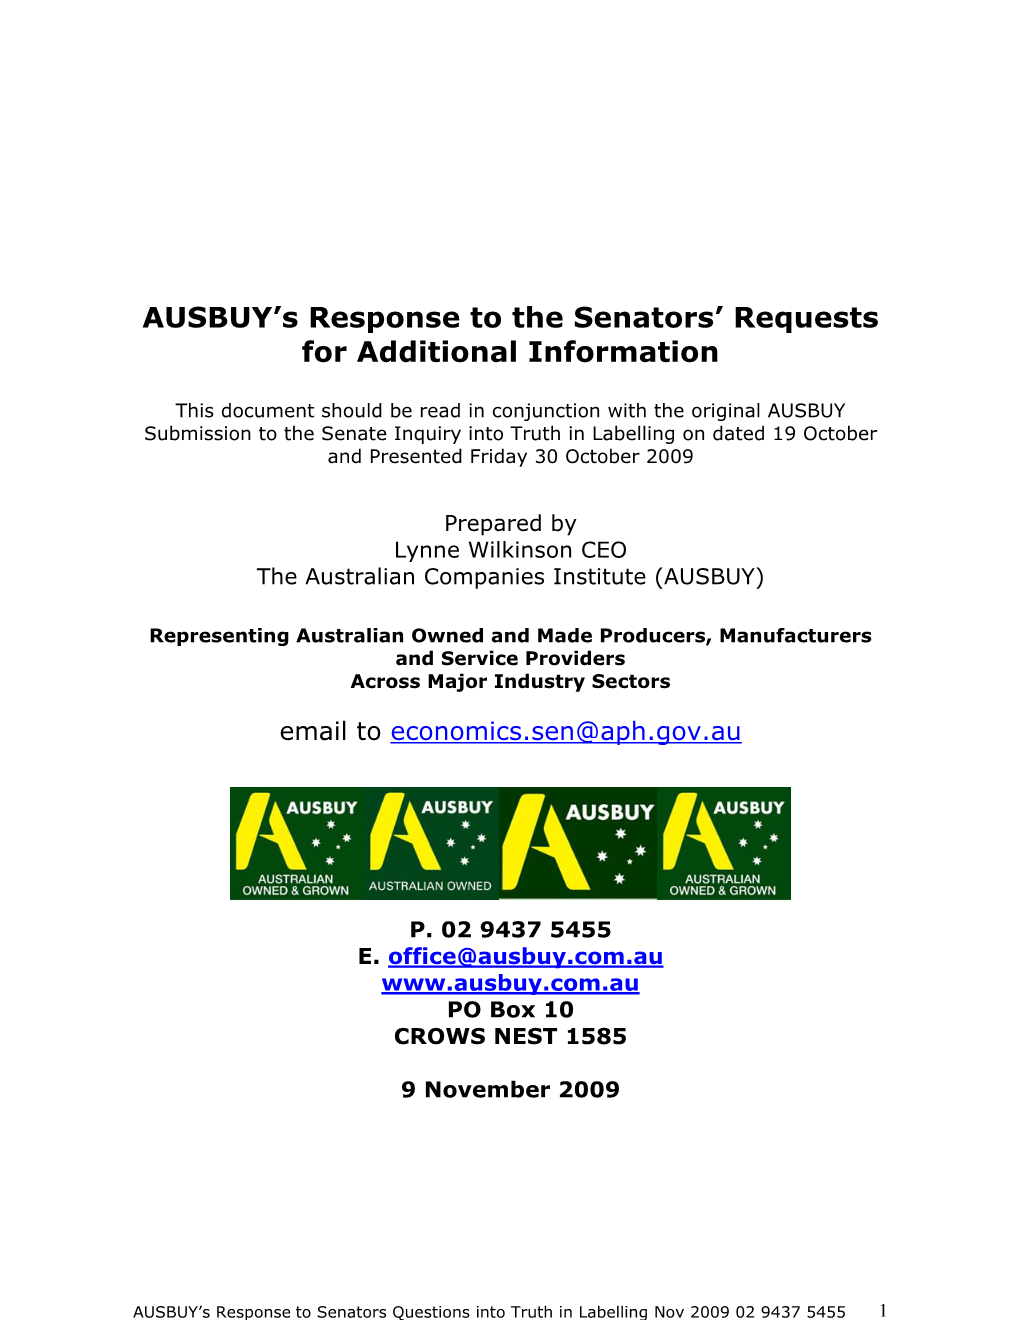 AUSBUY's Response to the Senators' Requests for Additional Information